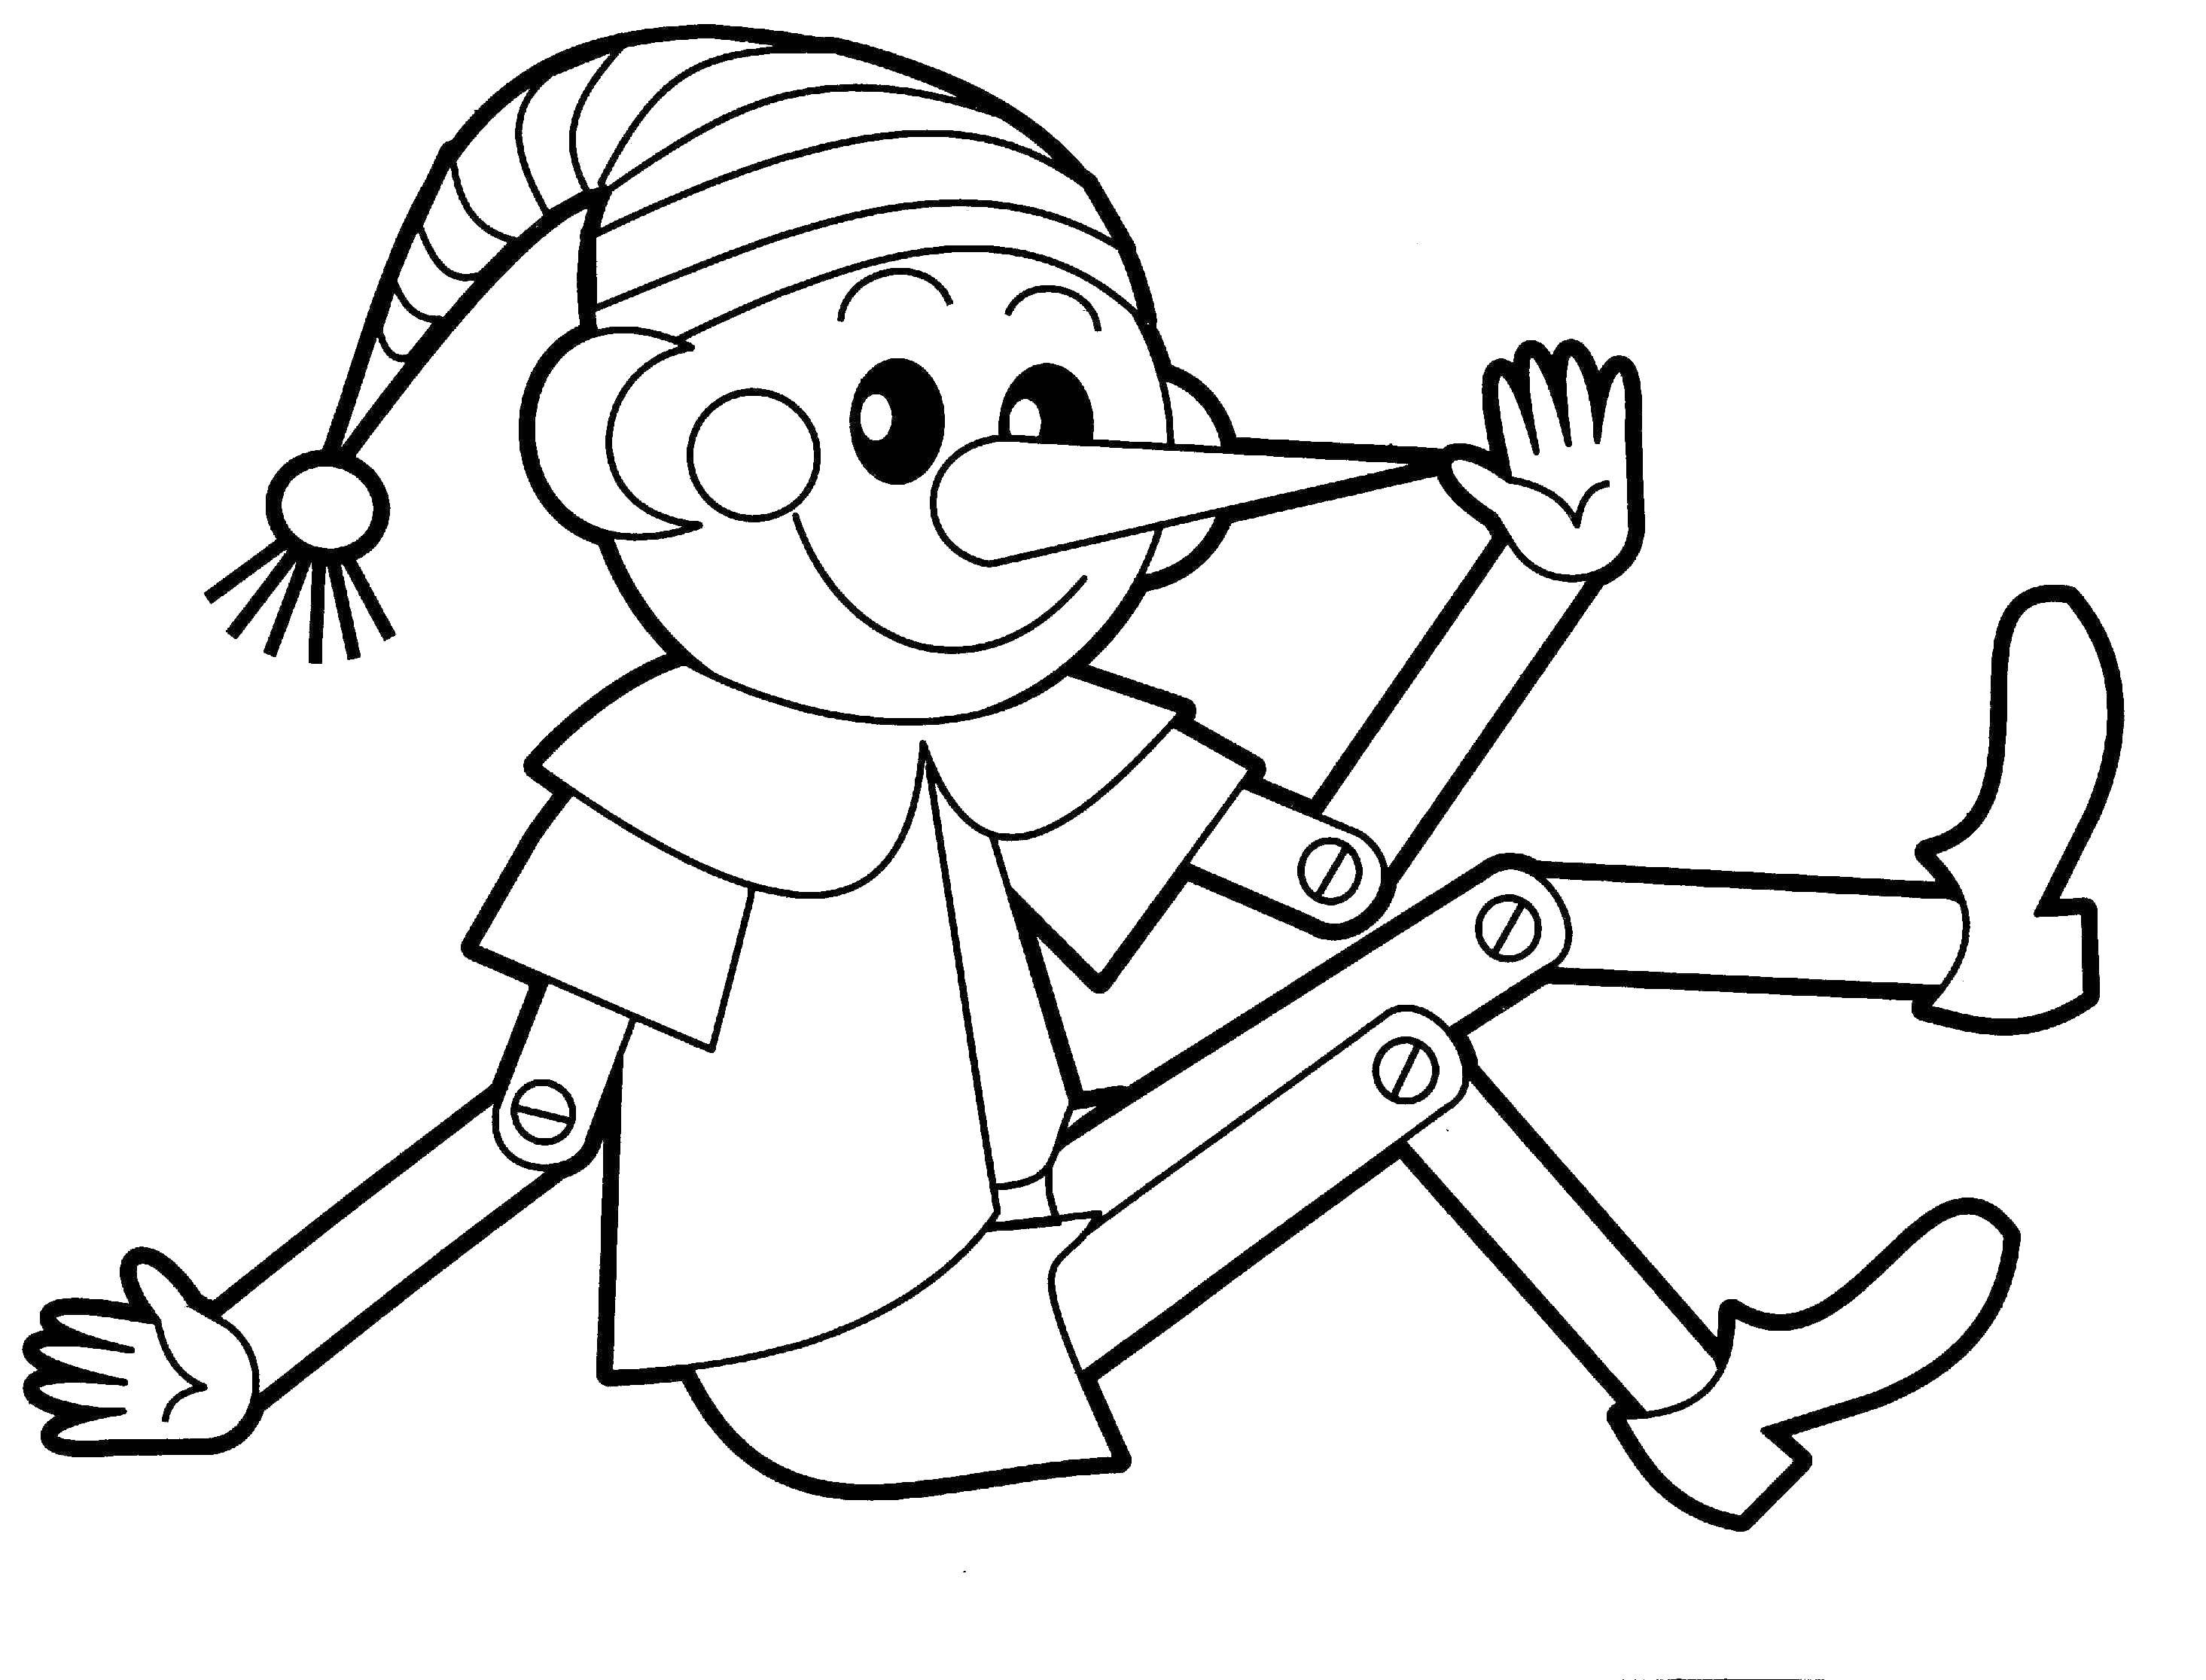 Coloring Pinocchio. Category Golden key. Tags:  Golden key, cartoons, Pinocchio.